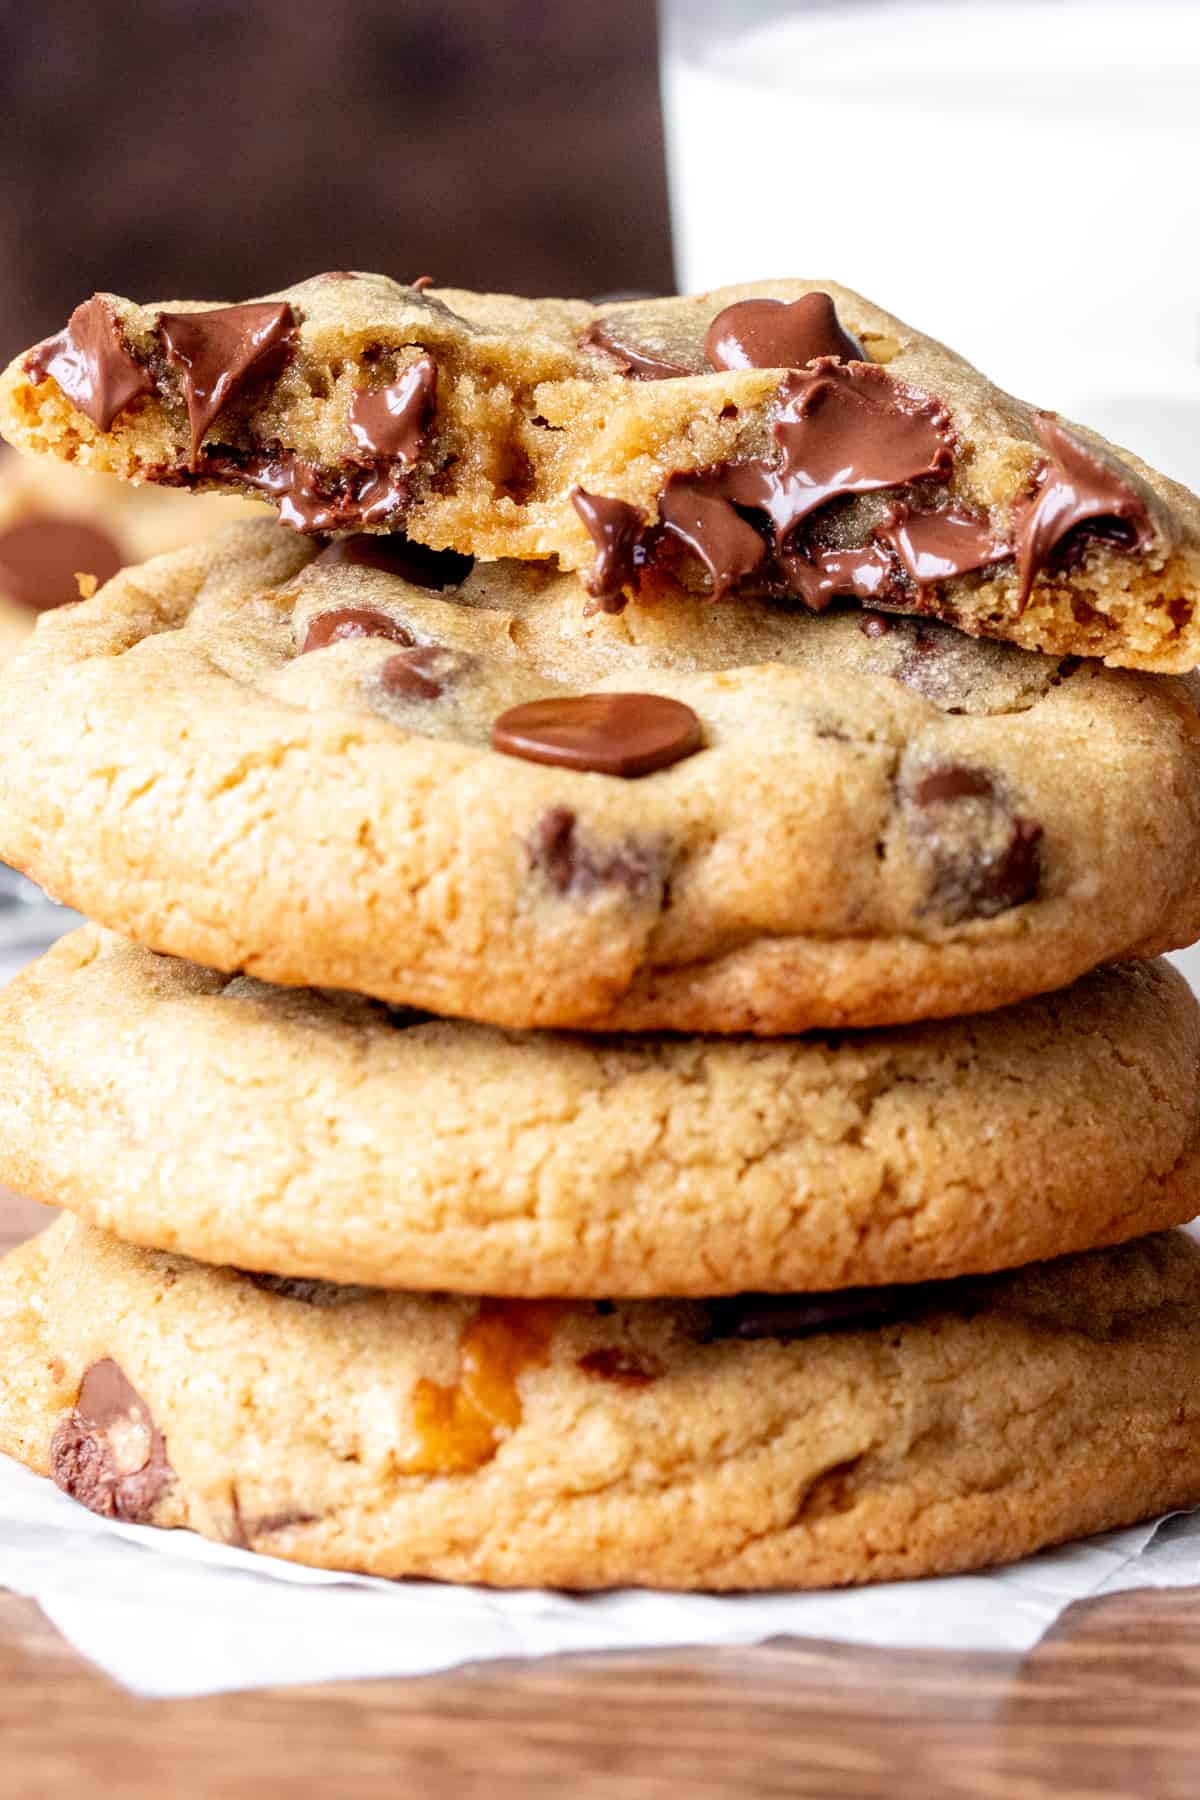 4 walnut chocolate chip cookies on top of each other, with top cookie broken in half